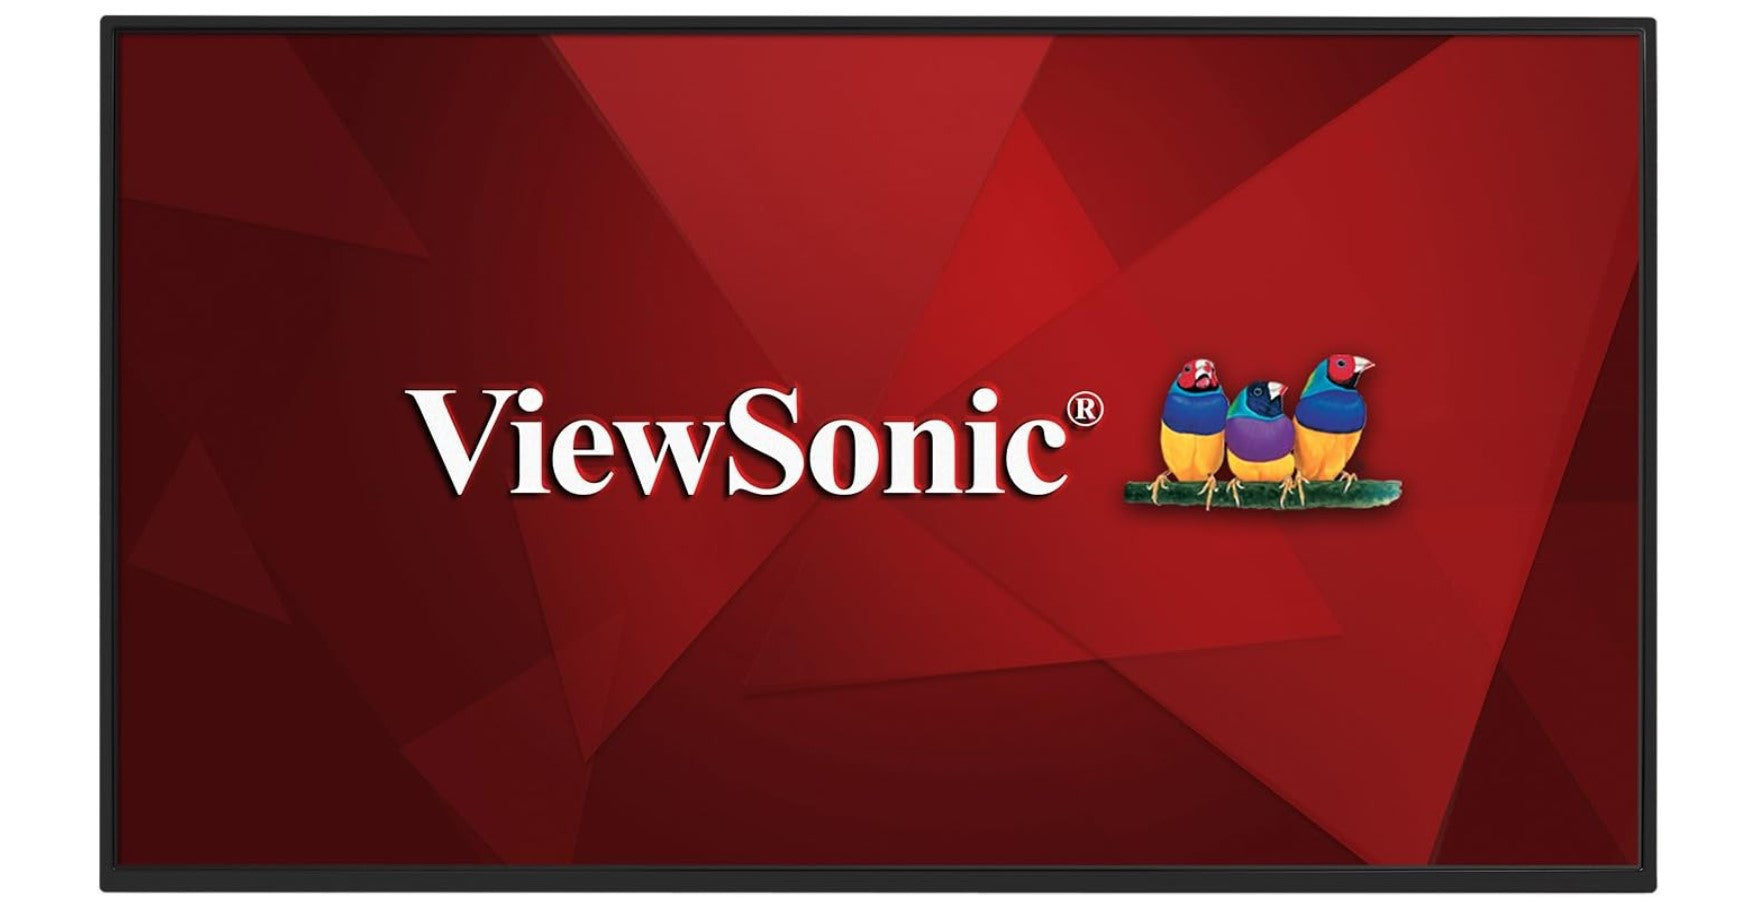 ViewSonic CDM5500R-S 55" LED Commercial Display Media Player - Certified Refurbished